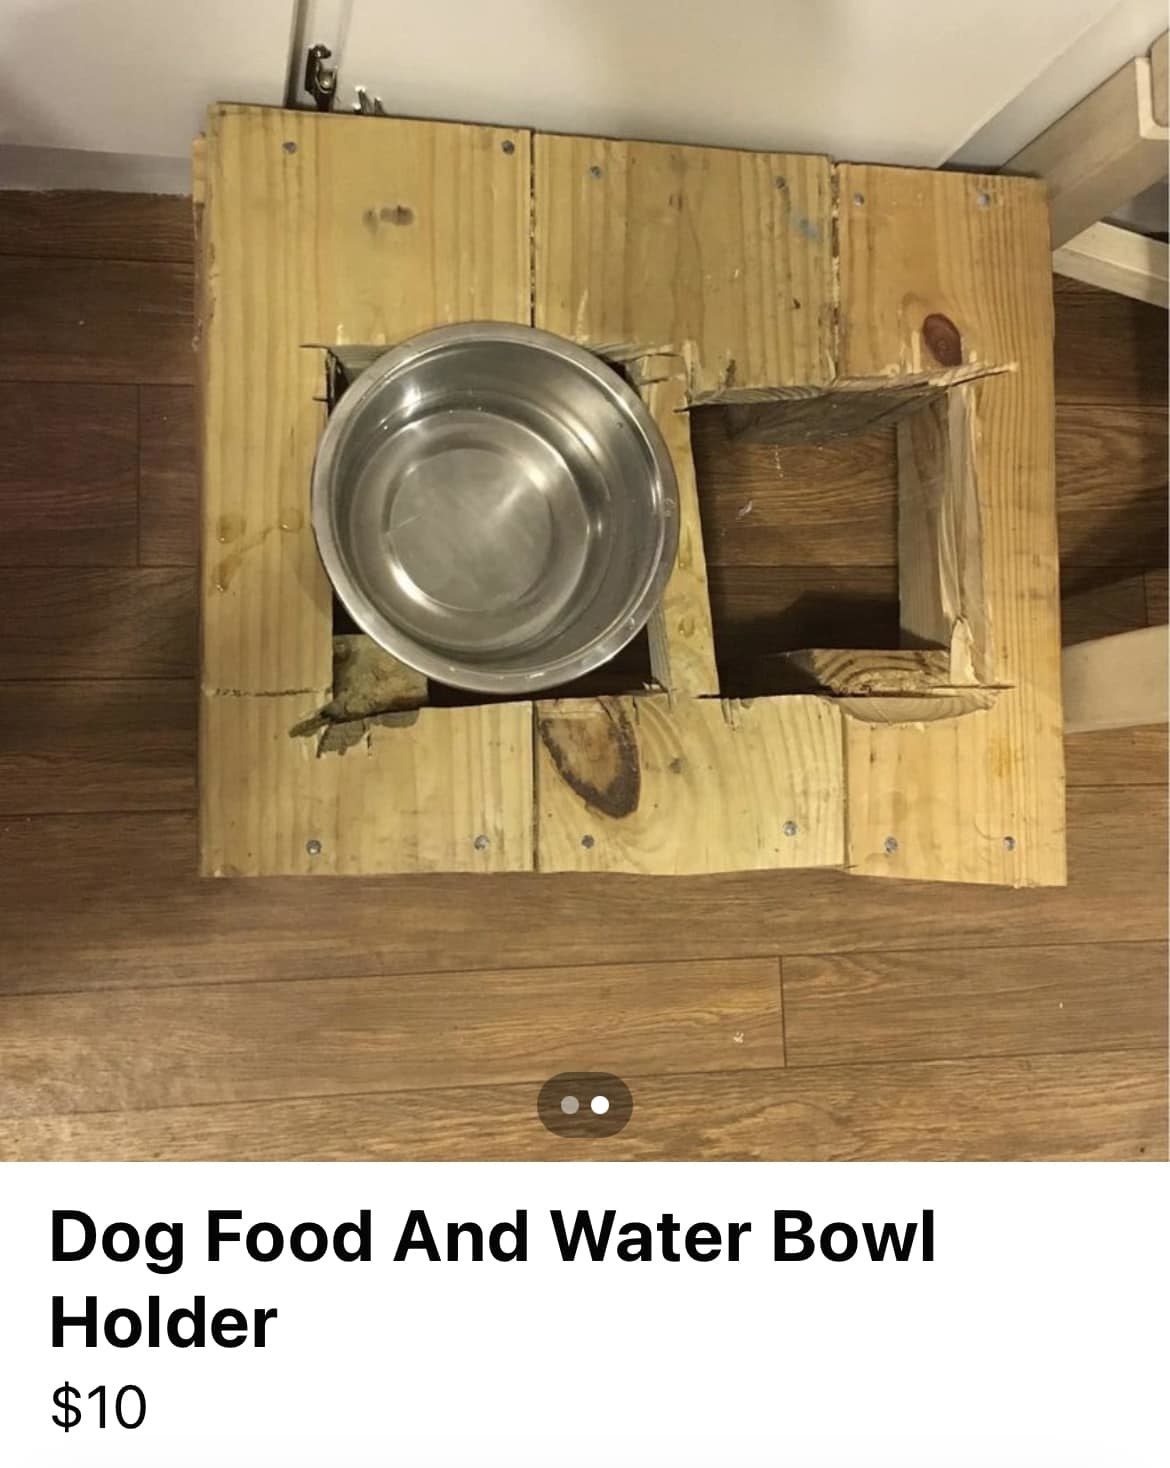 Very roughly constructed wooden dog bowl holder on sale for $10